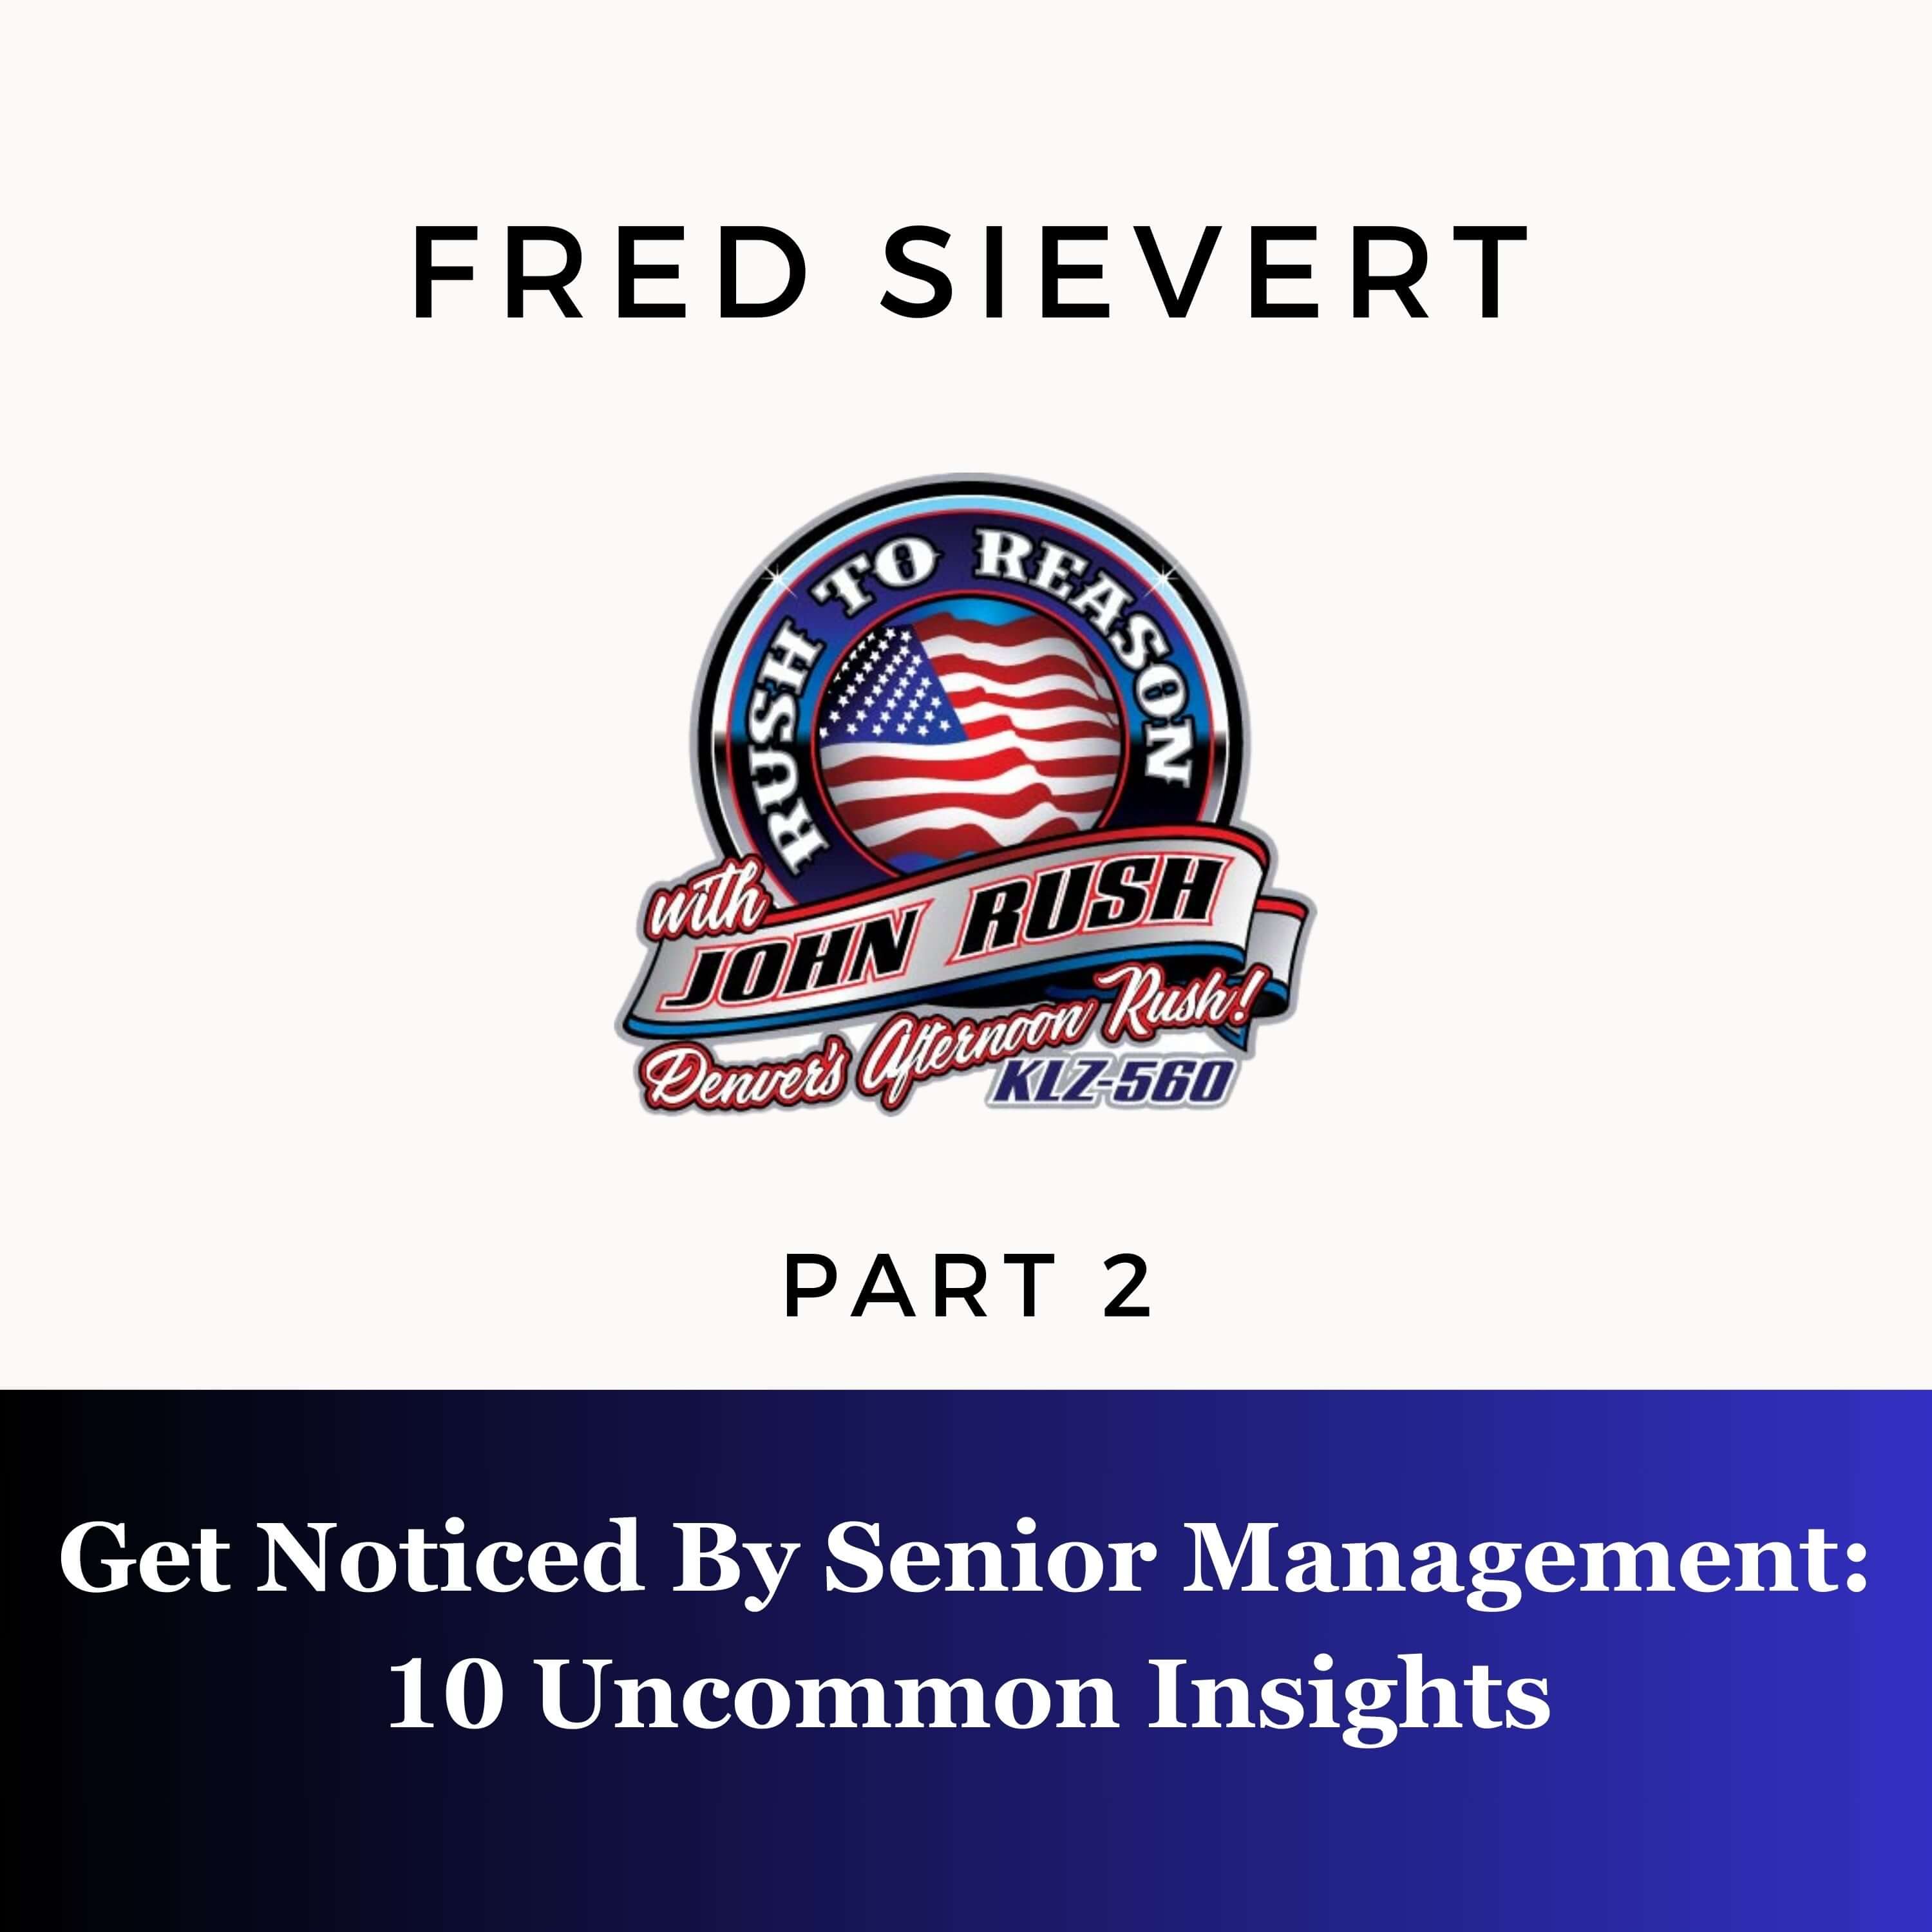 Get Noticed By Senior Management: 10 Uncommon Insights